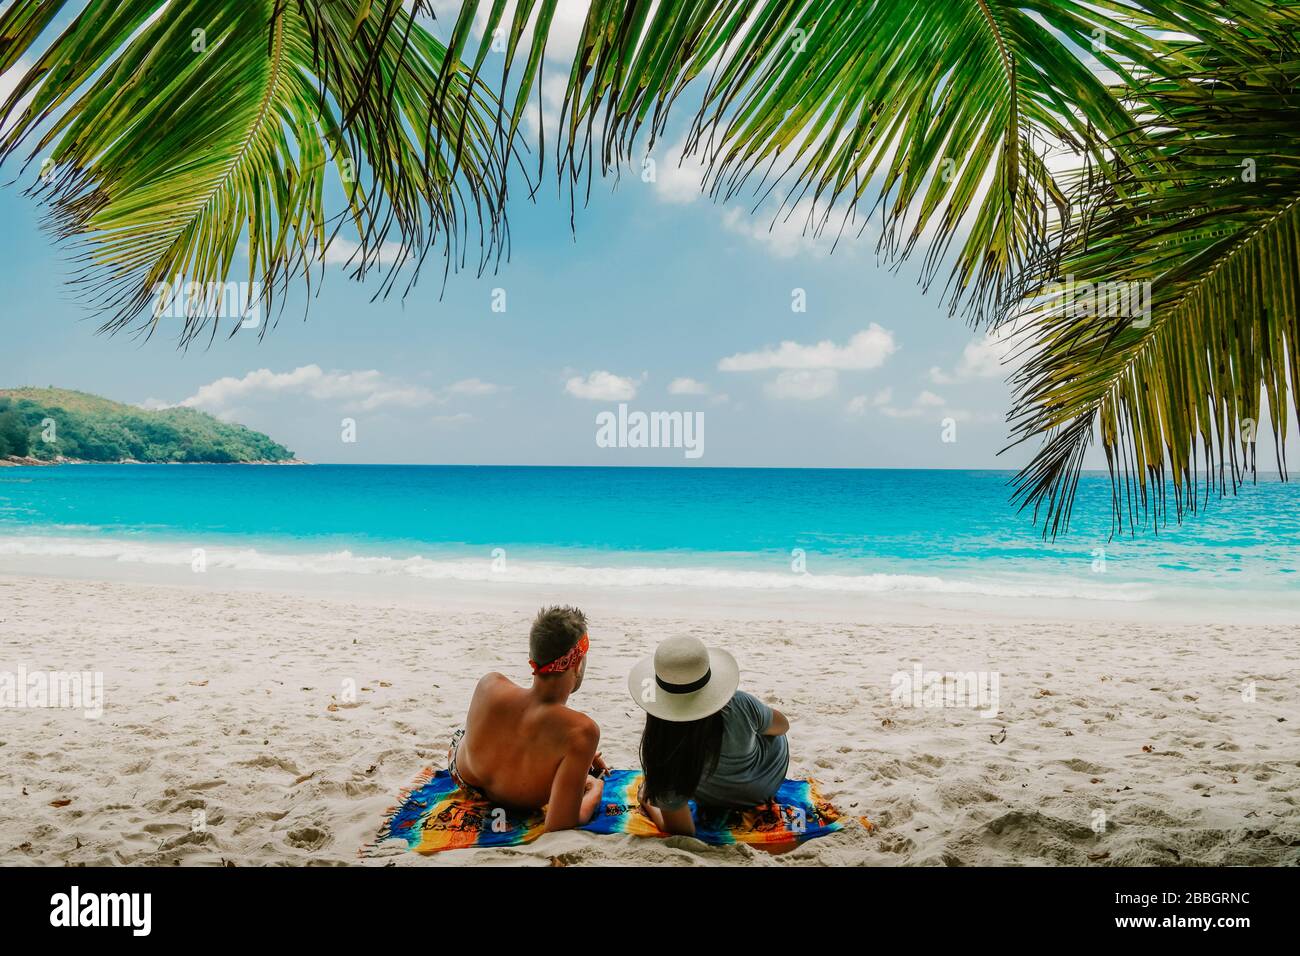 Tropical white beach at Praslin island Seychelles, happy Young couple man and woman during vacation Holiday at the beach relaxing under a palm tree Stock Photo